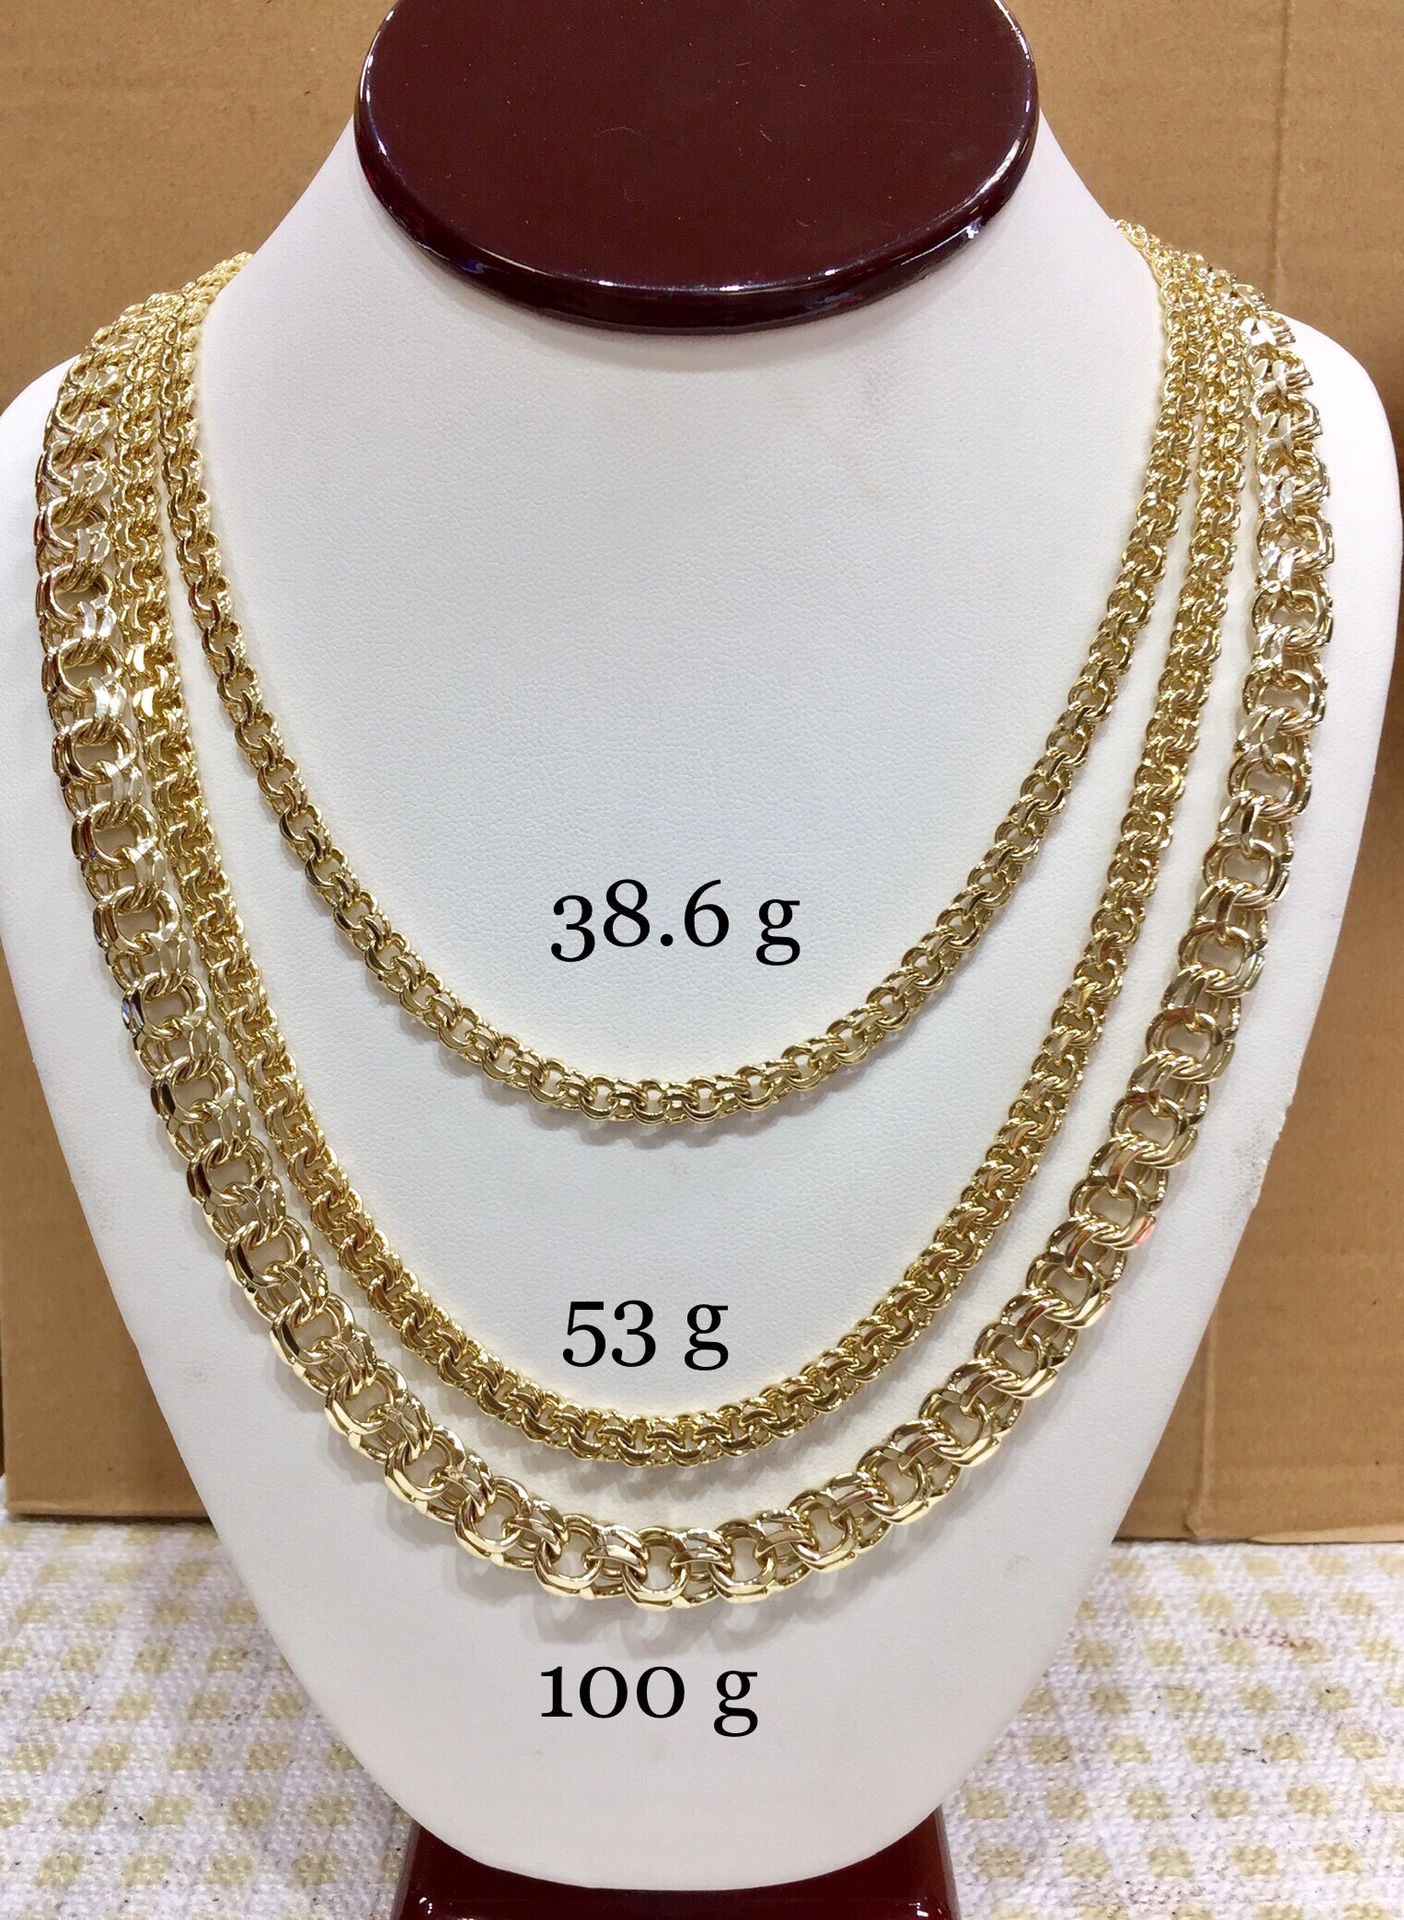 10 Karat Gold Chino links chain handmade 26 inches and 24 inches #ch107TD